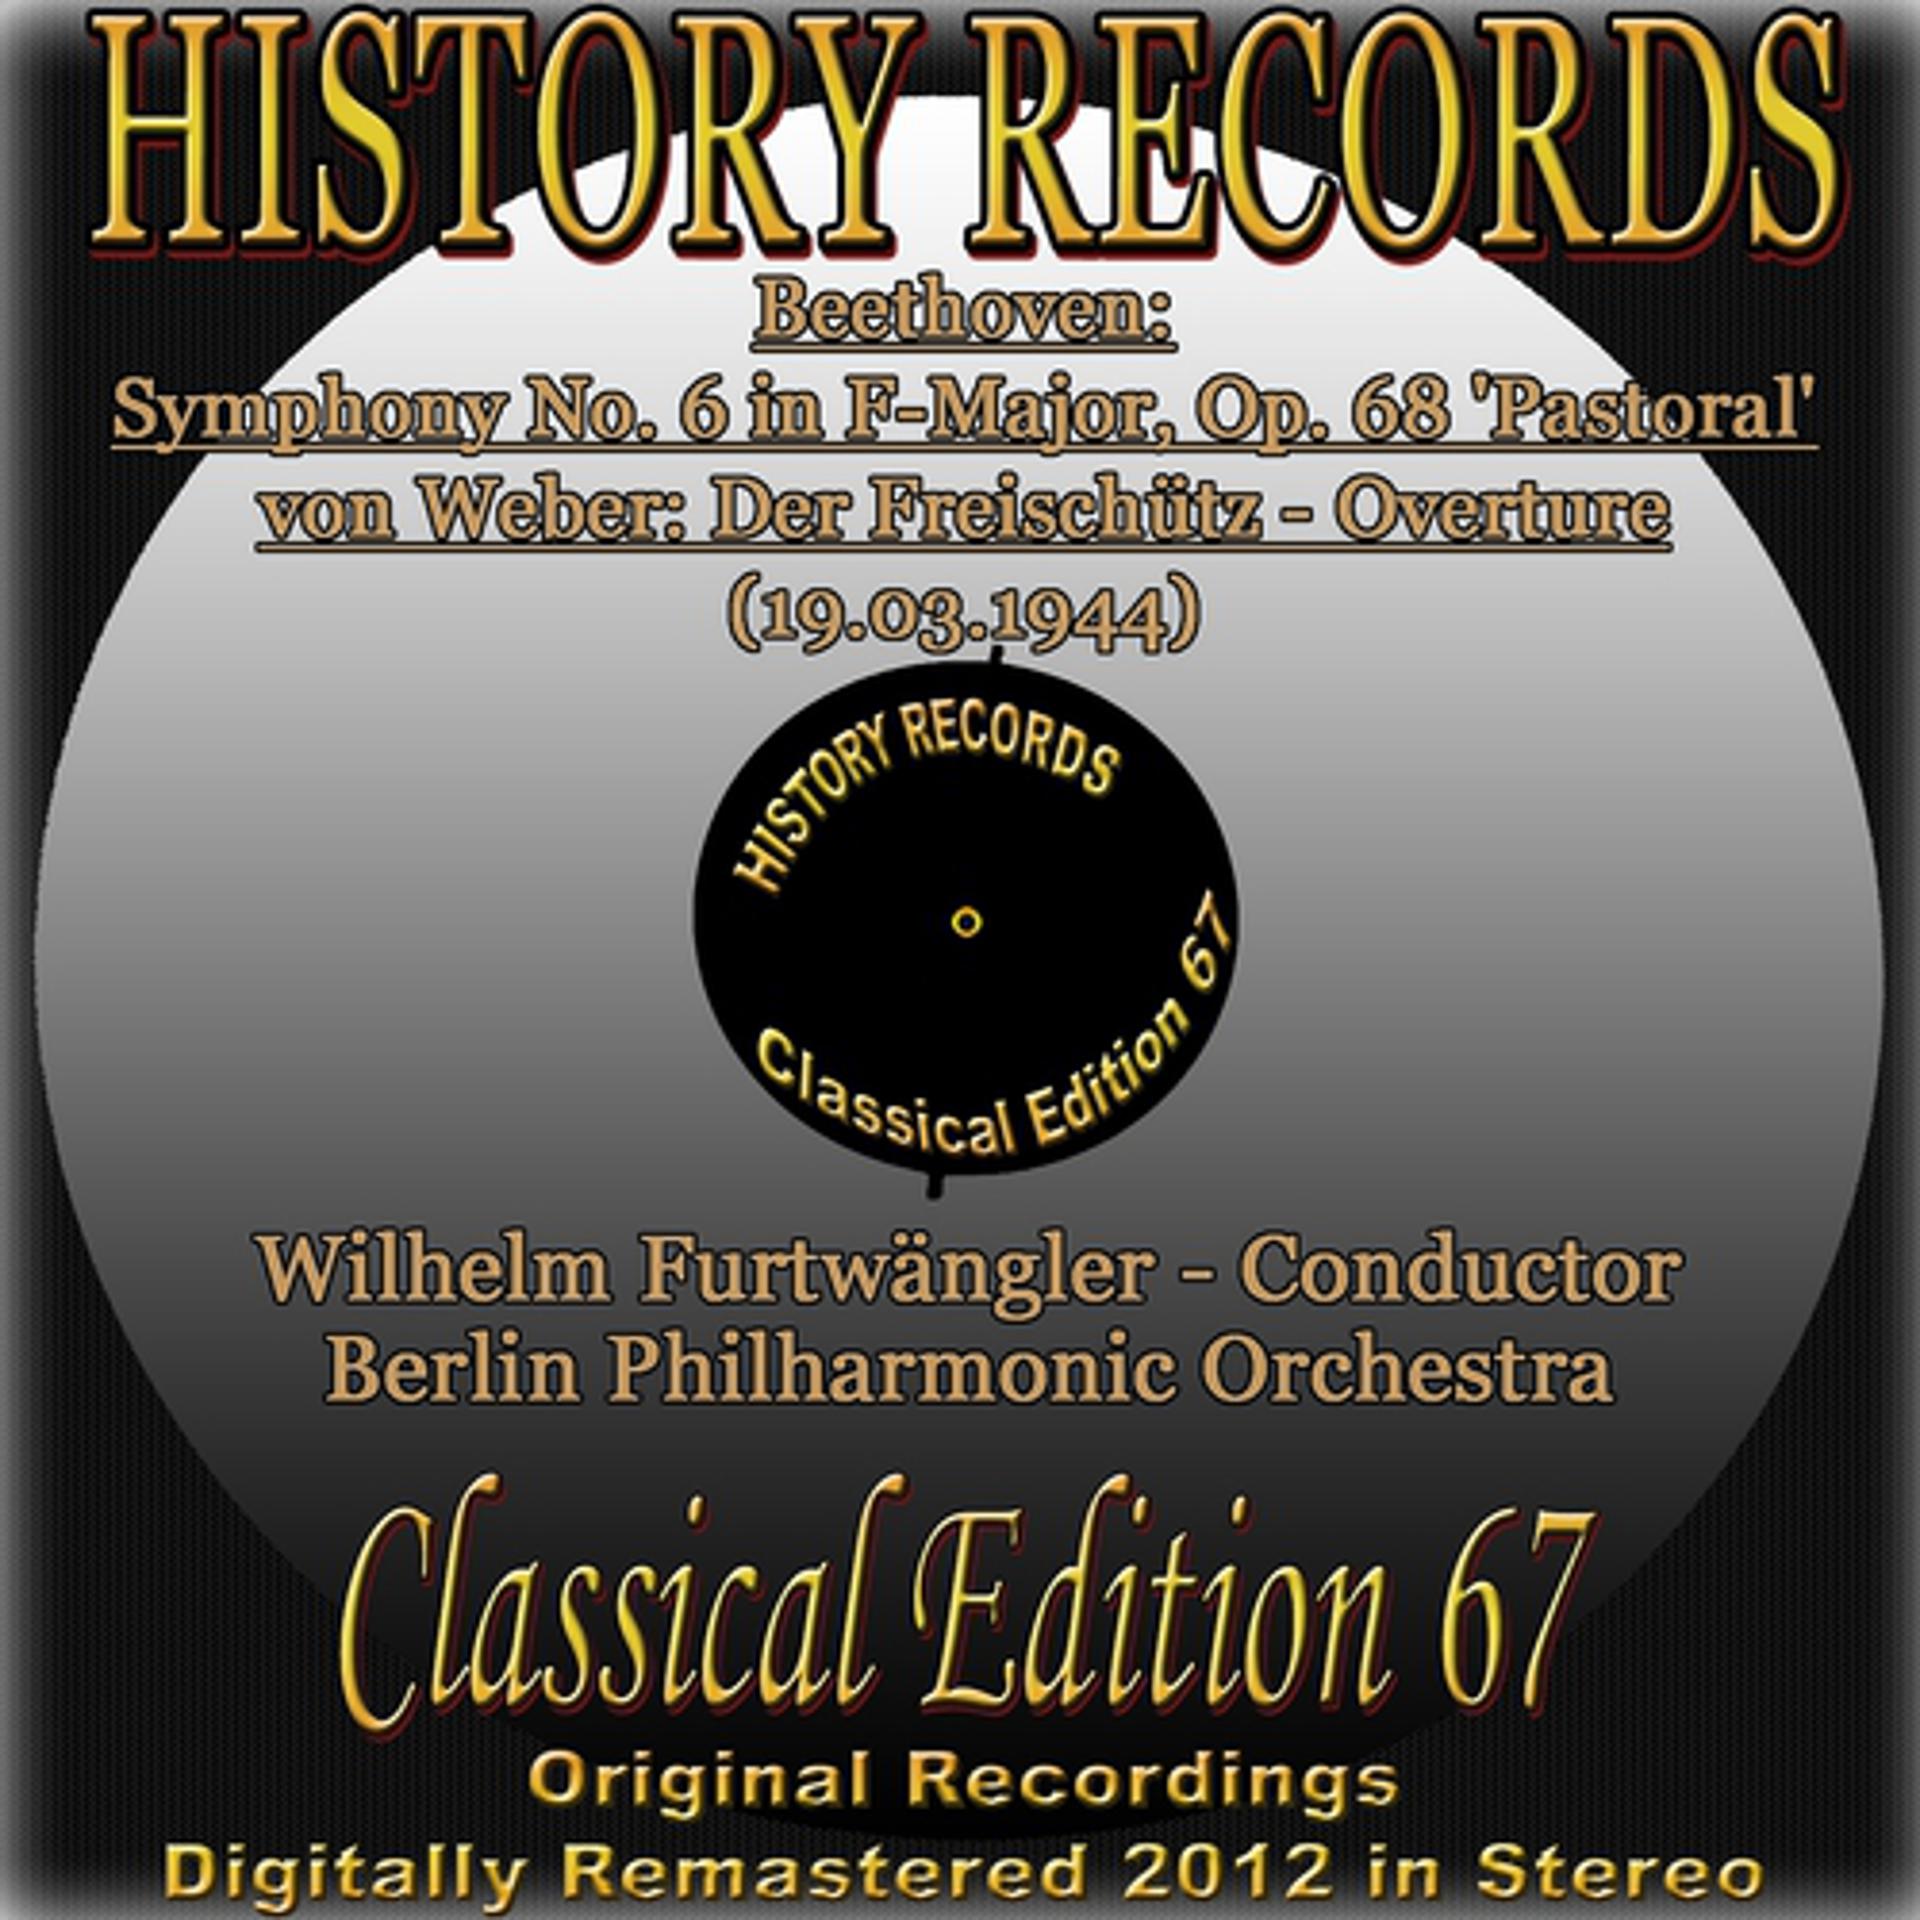 Постер альбома Beethoven: Symphony No. 6 in F Major, Op. 68 ''Pastoral'' - Von Weber: Der Freischütz: Overture (History Records - Classical Edition 67 - Original Recordings Digitally Remastered 2012 In Stere)